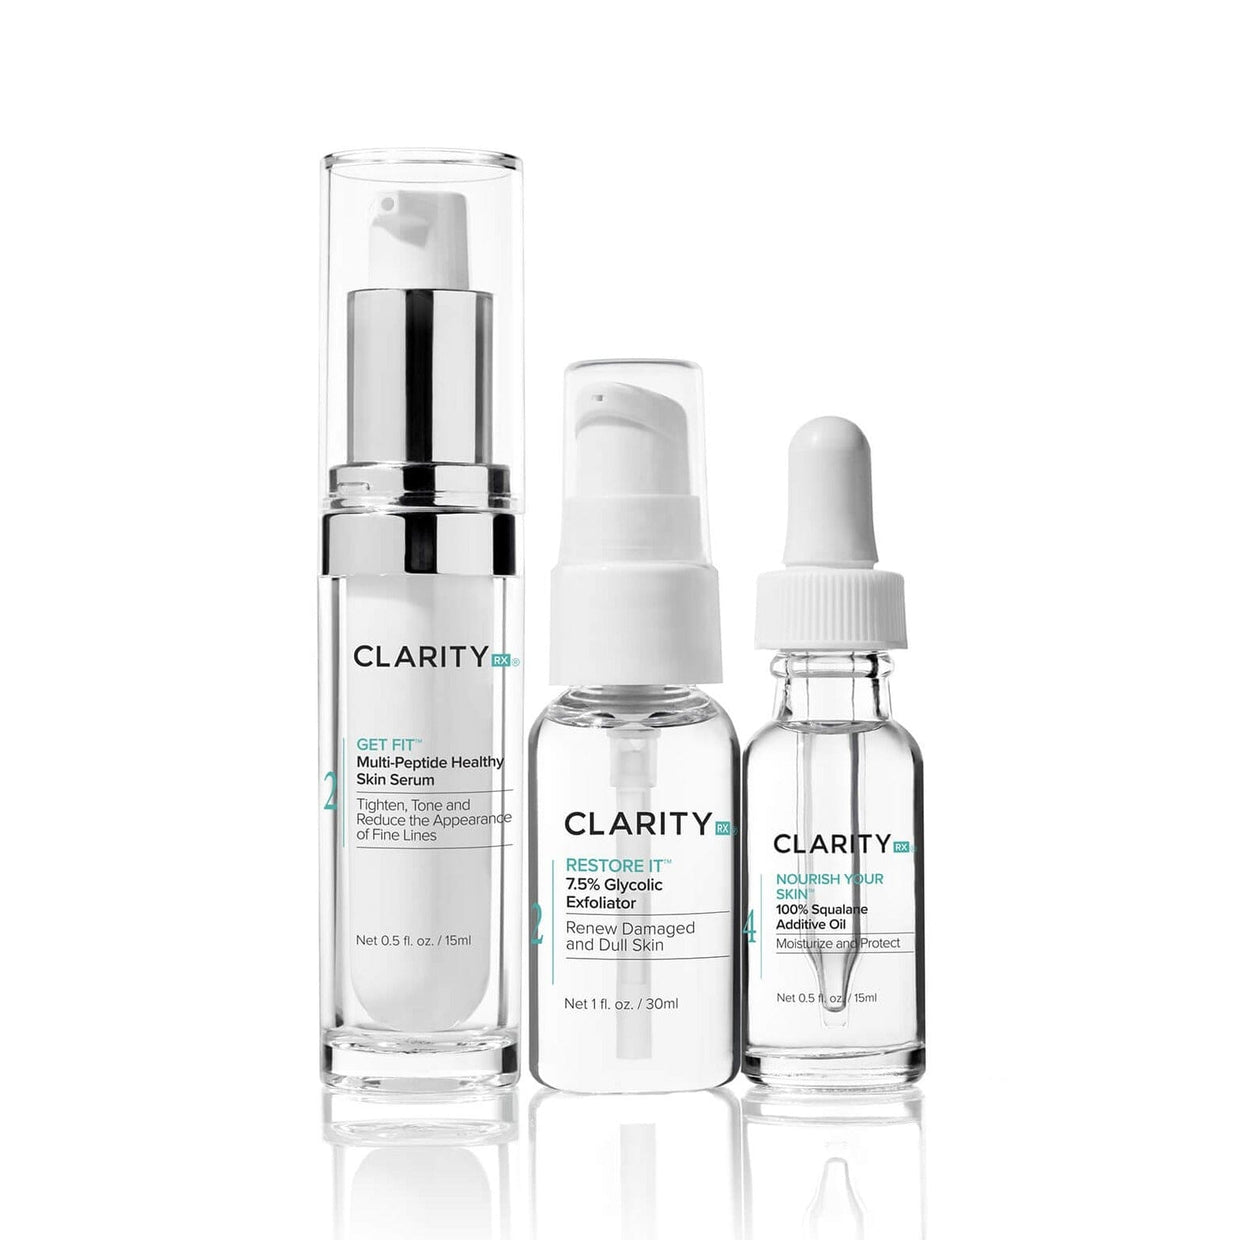 ClarityRx Turn Back Time Age Reversal Kit ClarityRx Shop at Exclusive Beauty Club